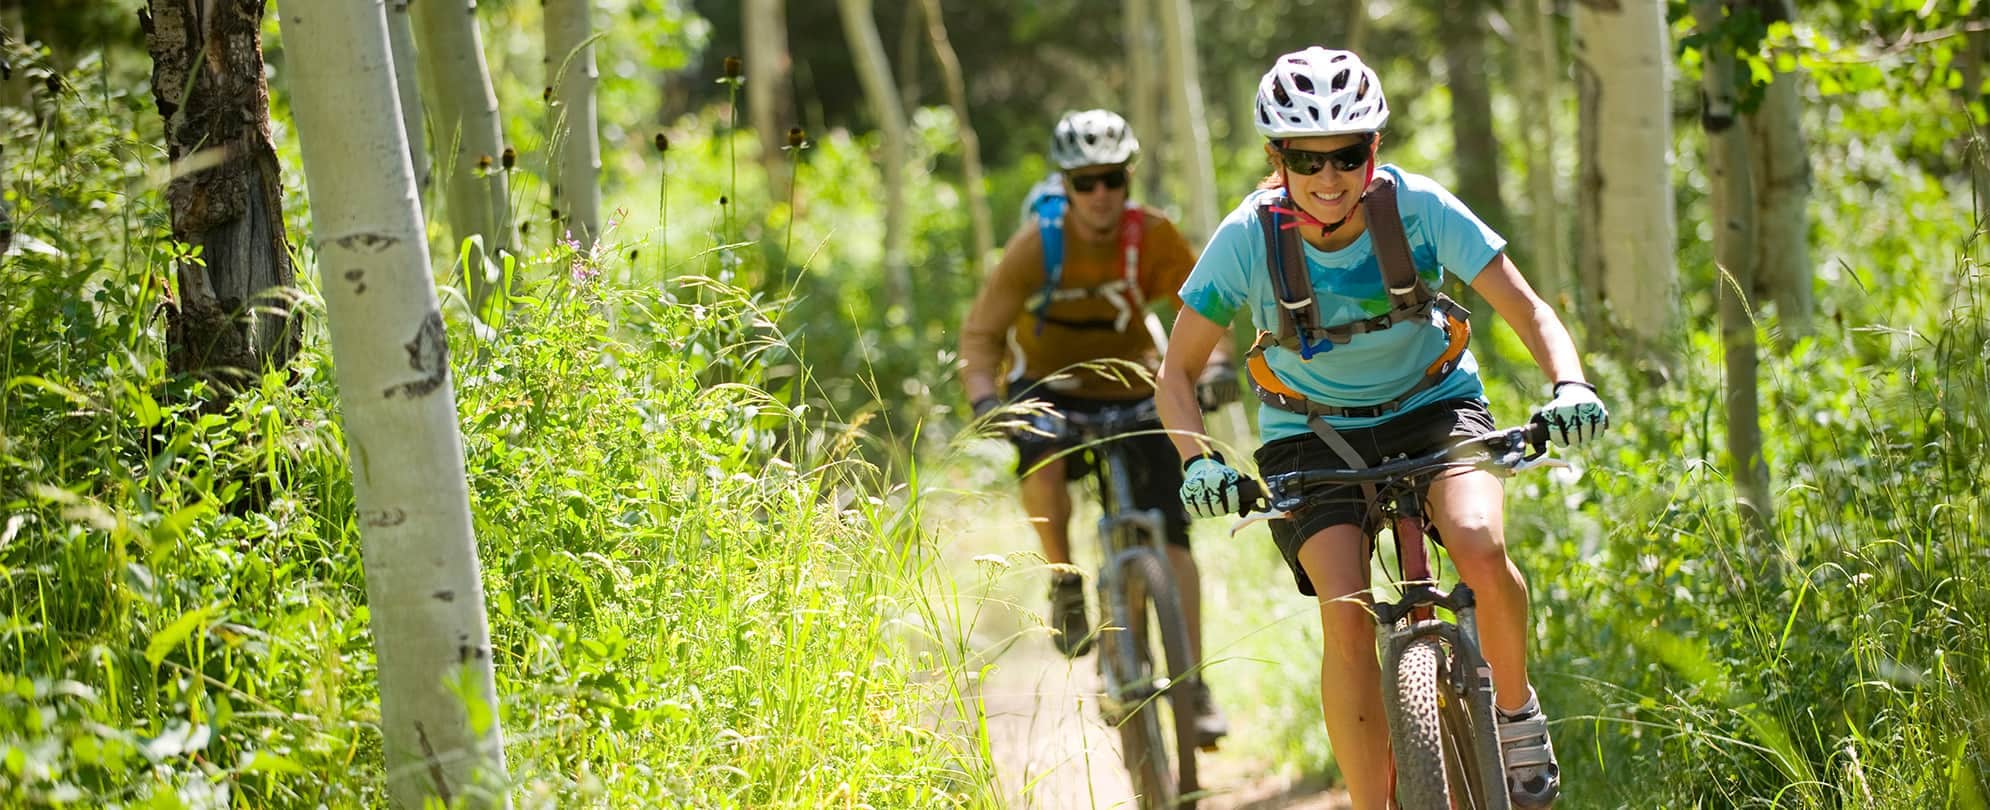 A man and woman wearing helmets and sunglasses ride bikes along a trail in Park City, Utah.